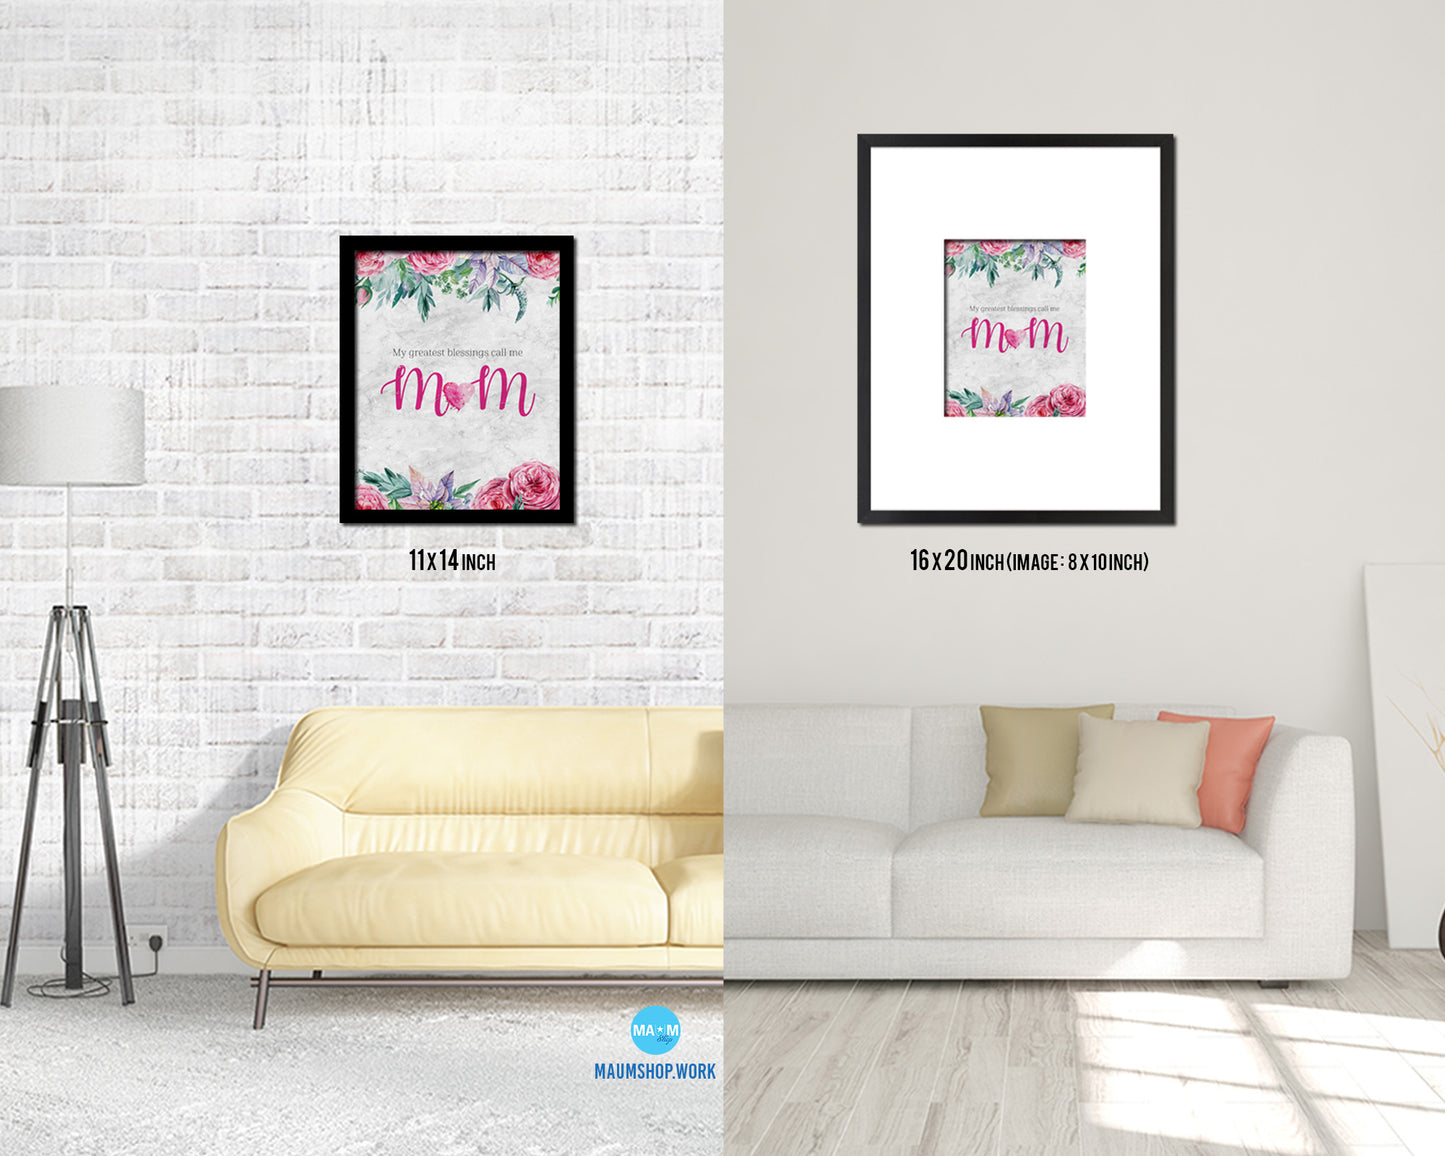 My greatest blessings call me Mom Bible Scripture Verse Framed Print Wall Art Decor Gifts